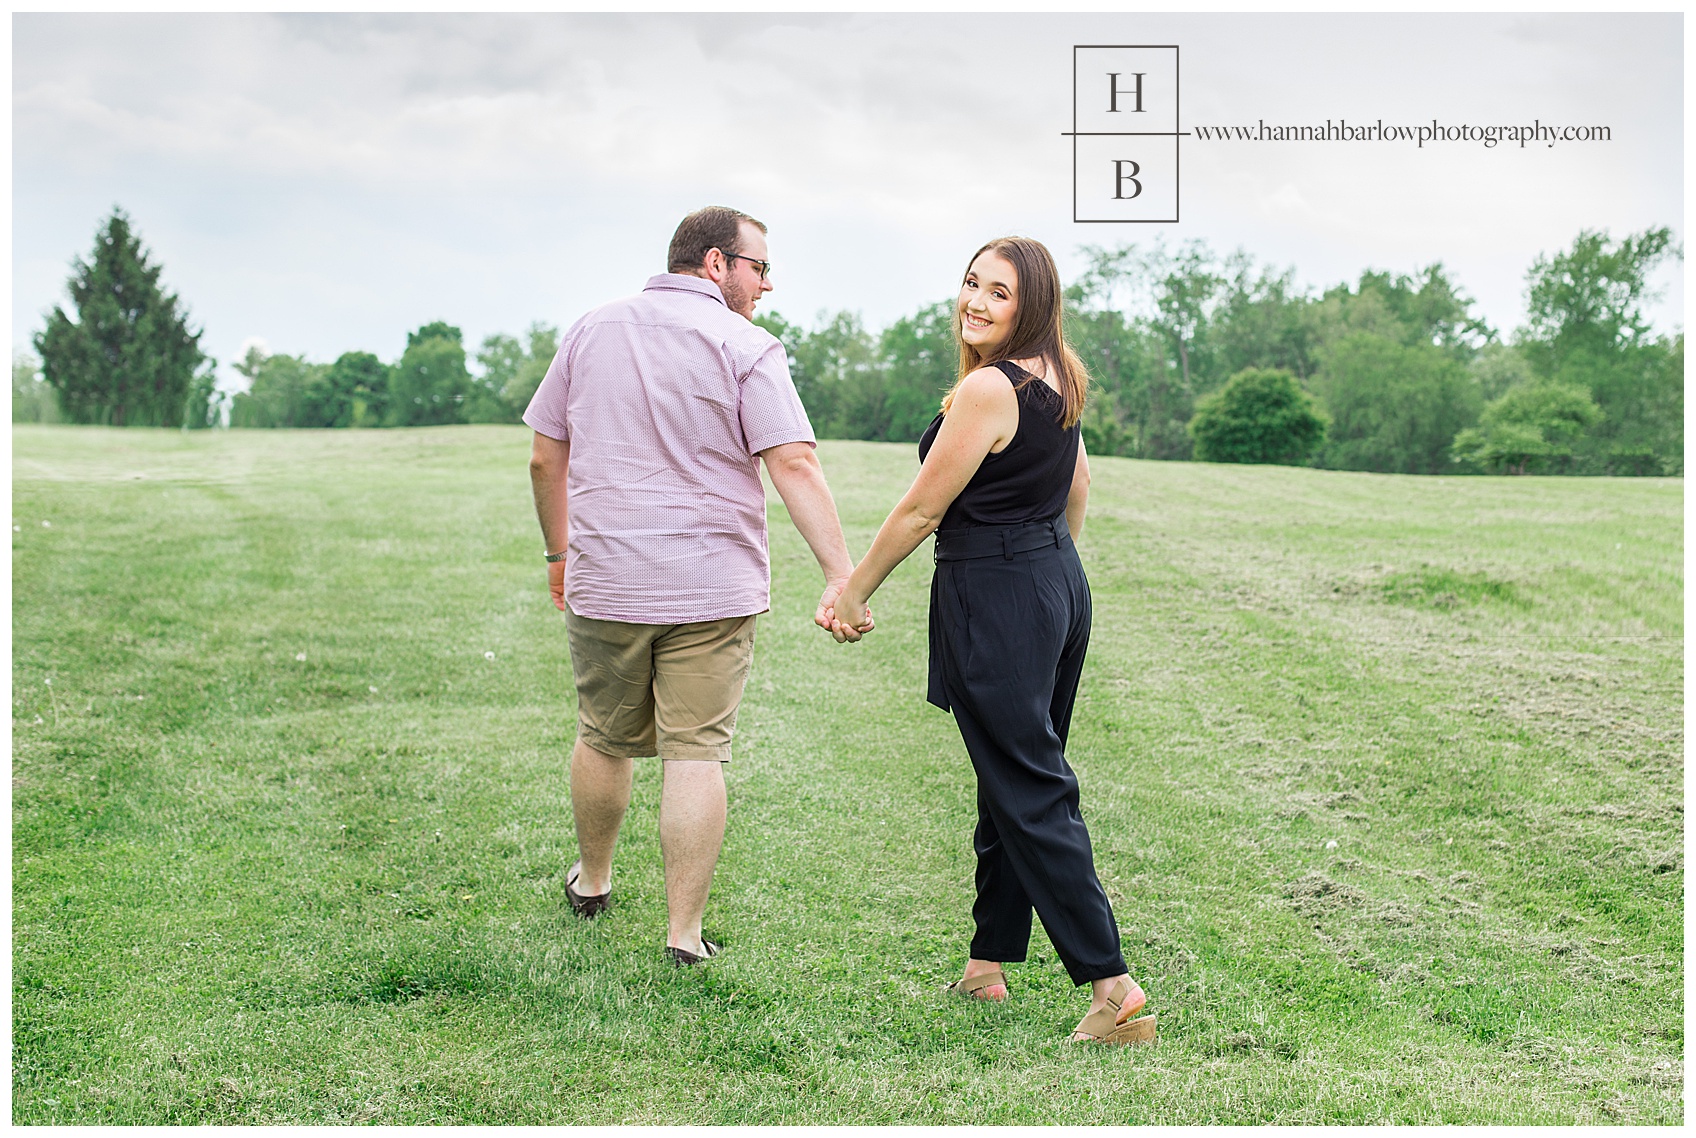 Engagement Photos in a Field at Brooke Hills Park in Wellsburg West Virginia